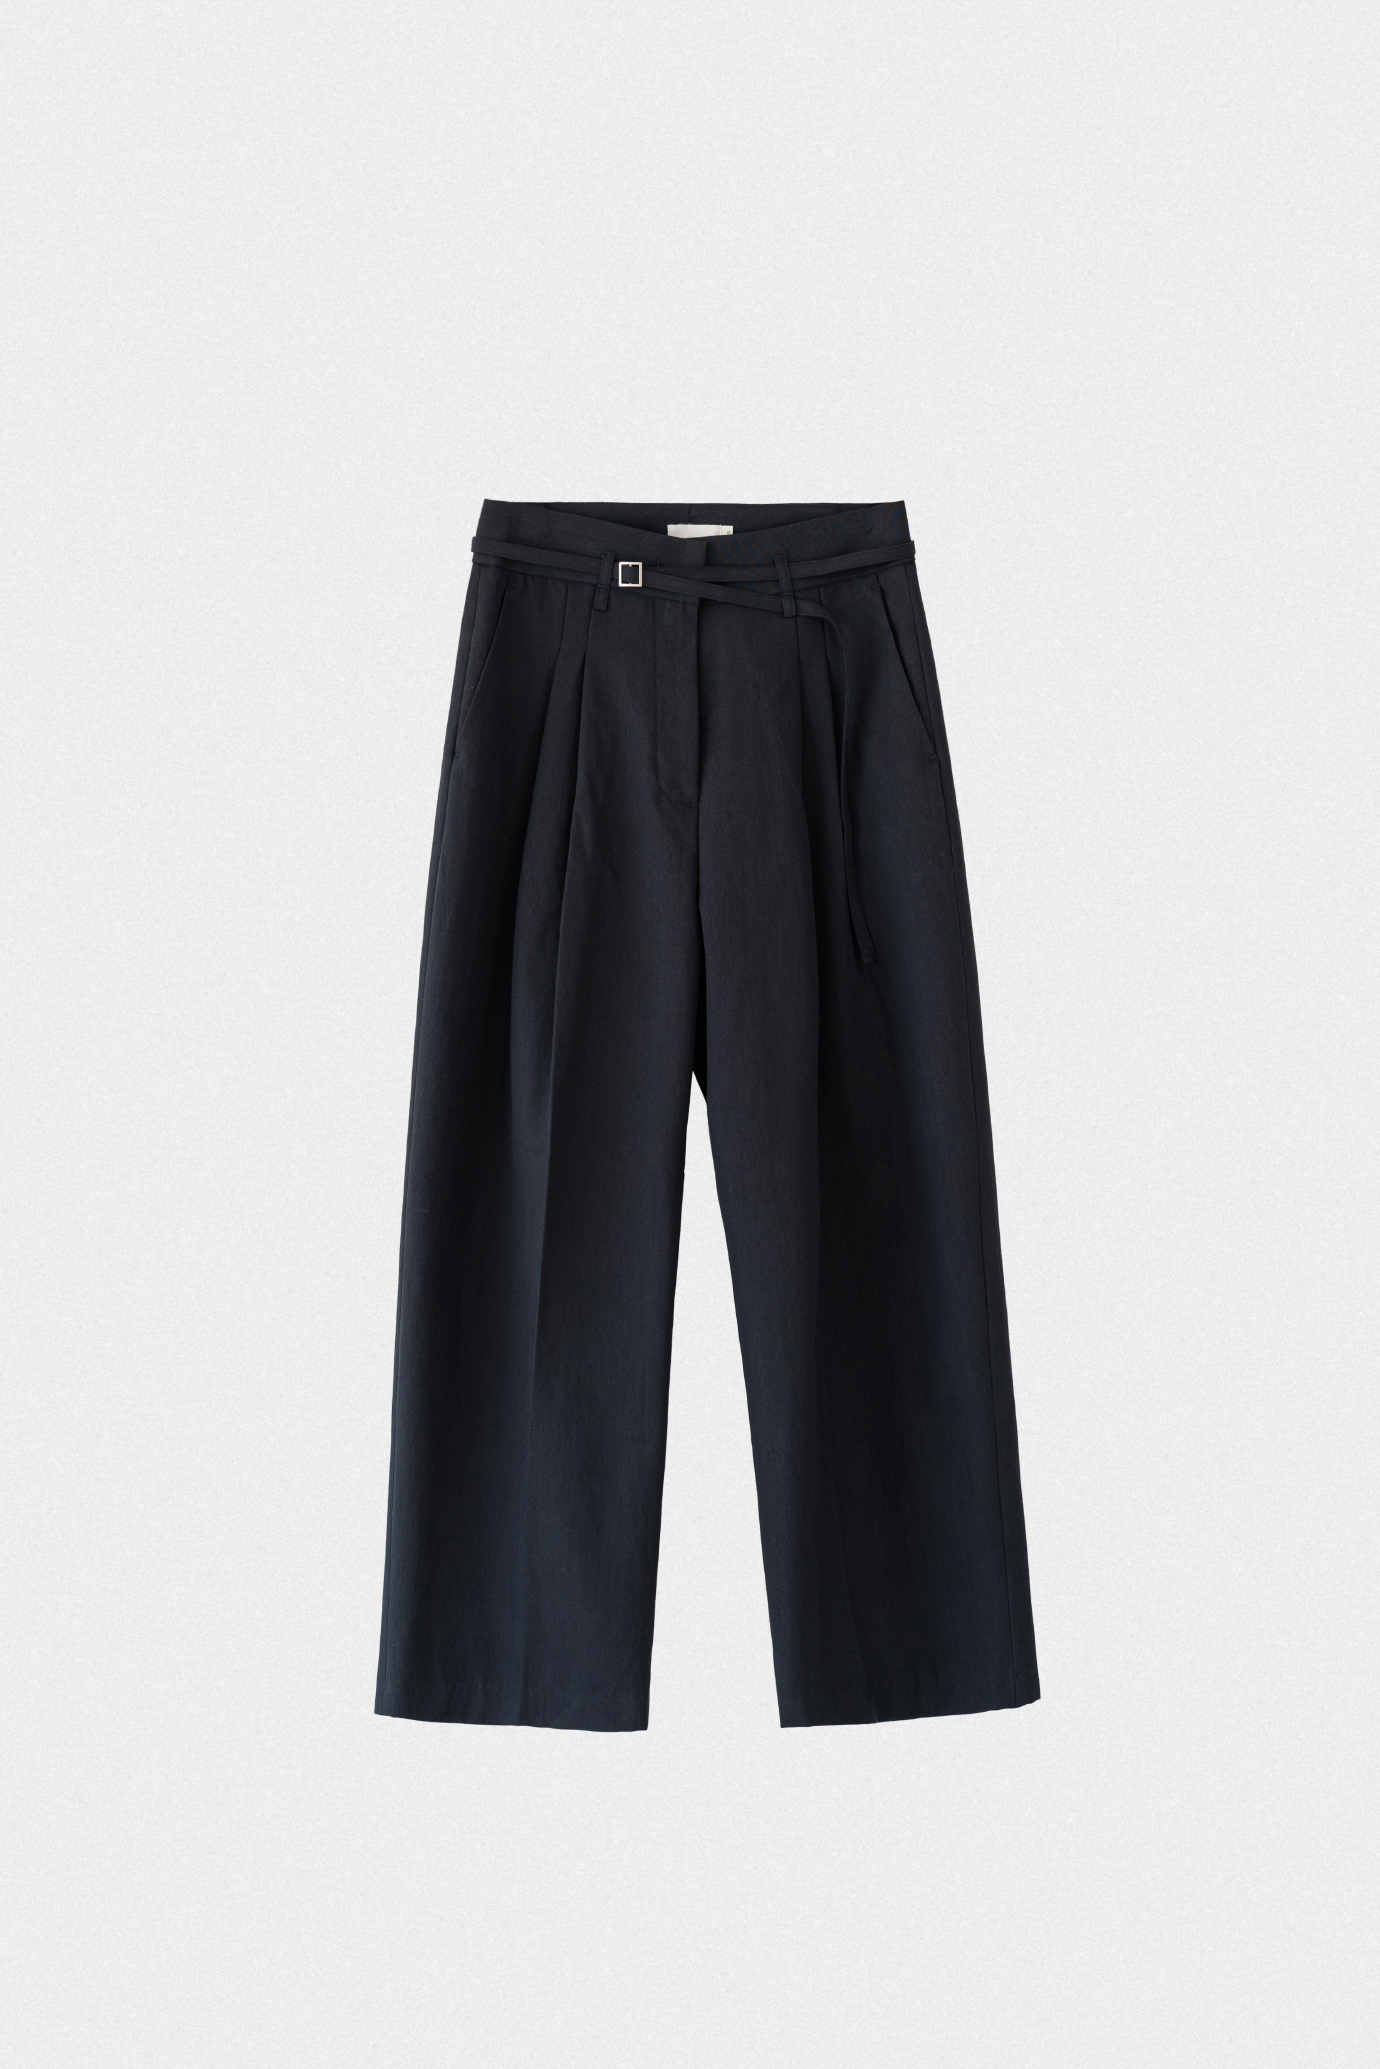 19866_Belt Tailored Trousers [ow]